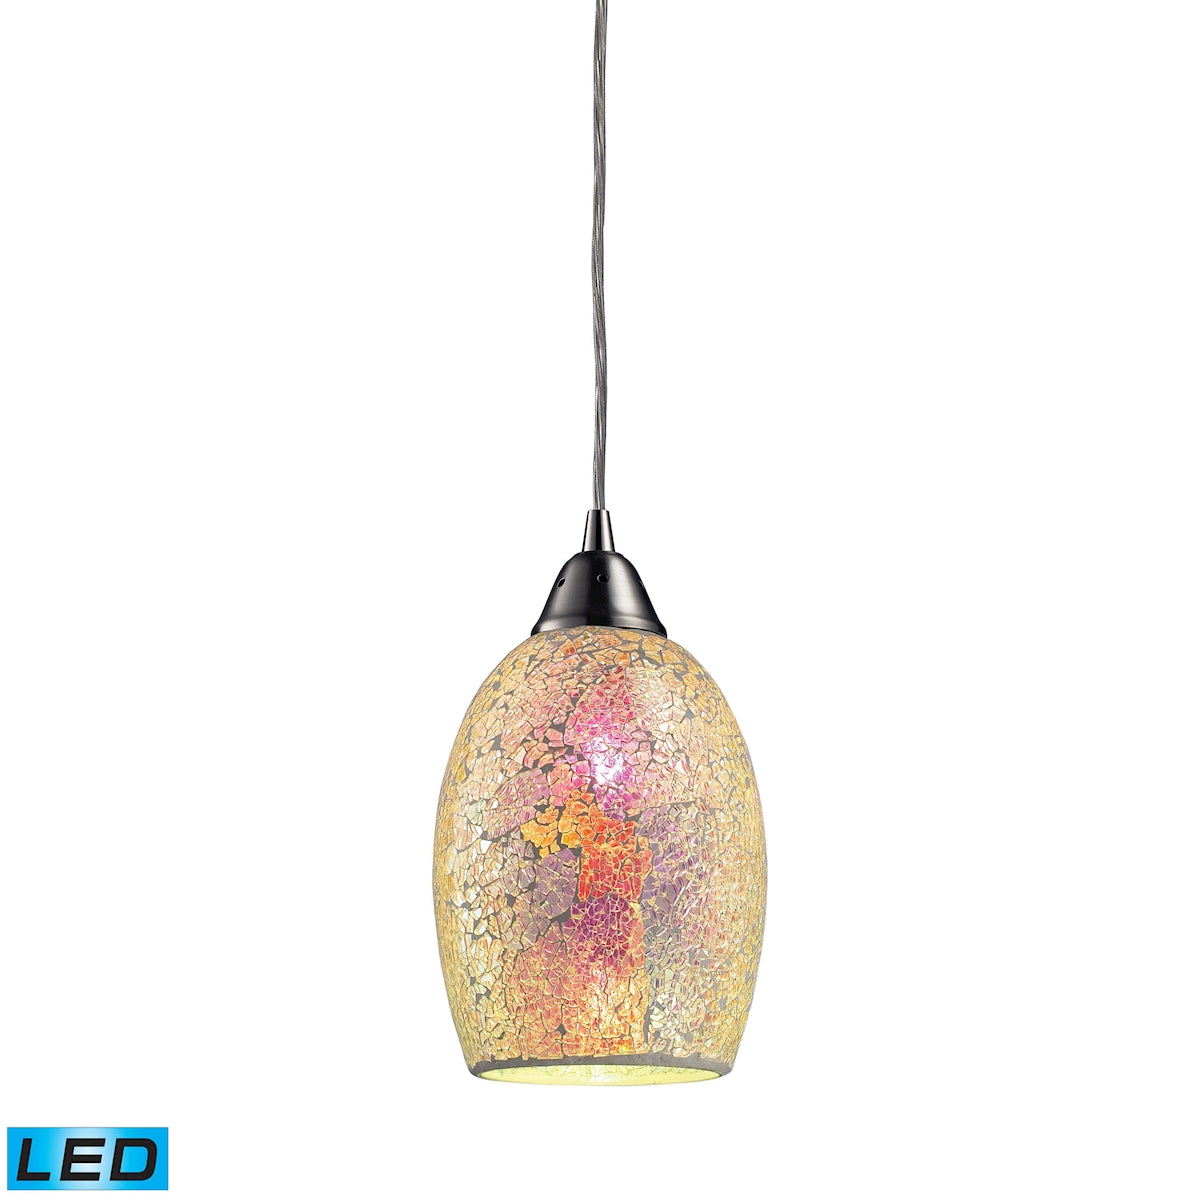 ELK Lighting 73041-1-LED Avalon 1-Light Mini Pendant in Satin Nickel with Multi-colored Crackle Glass - Includes LED Bulb